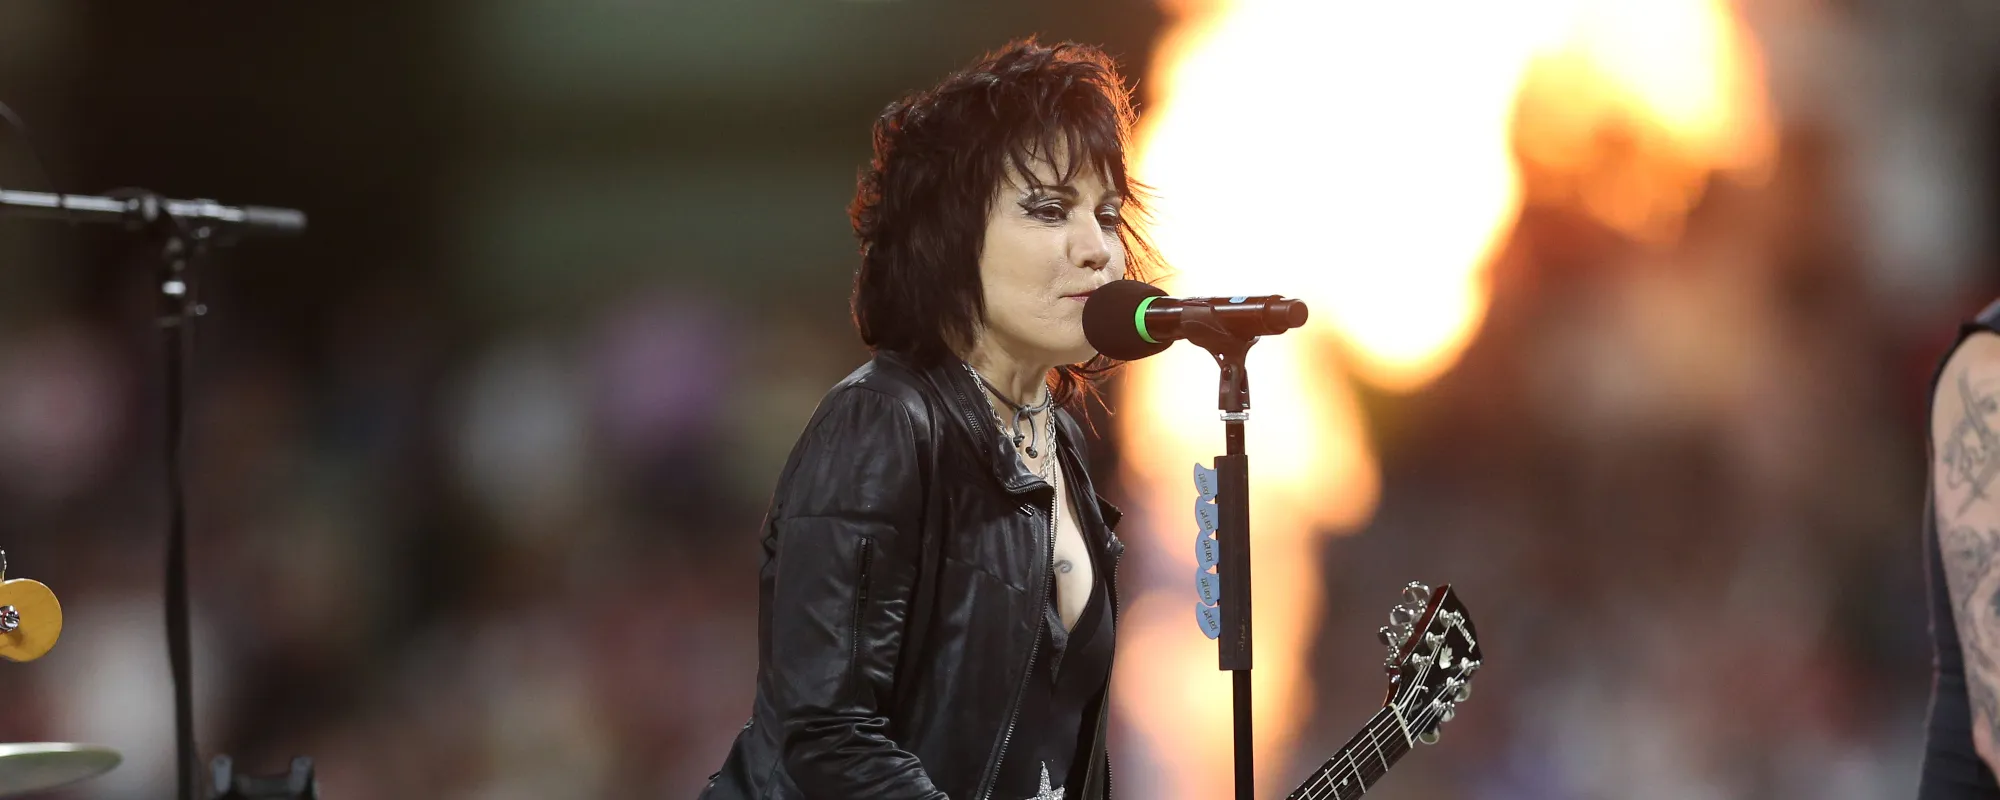 Joan Jett and the Blackhearts Release First New Song in Decade with Punk “If You’re Blue”